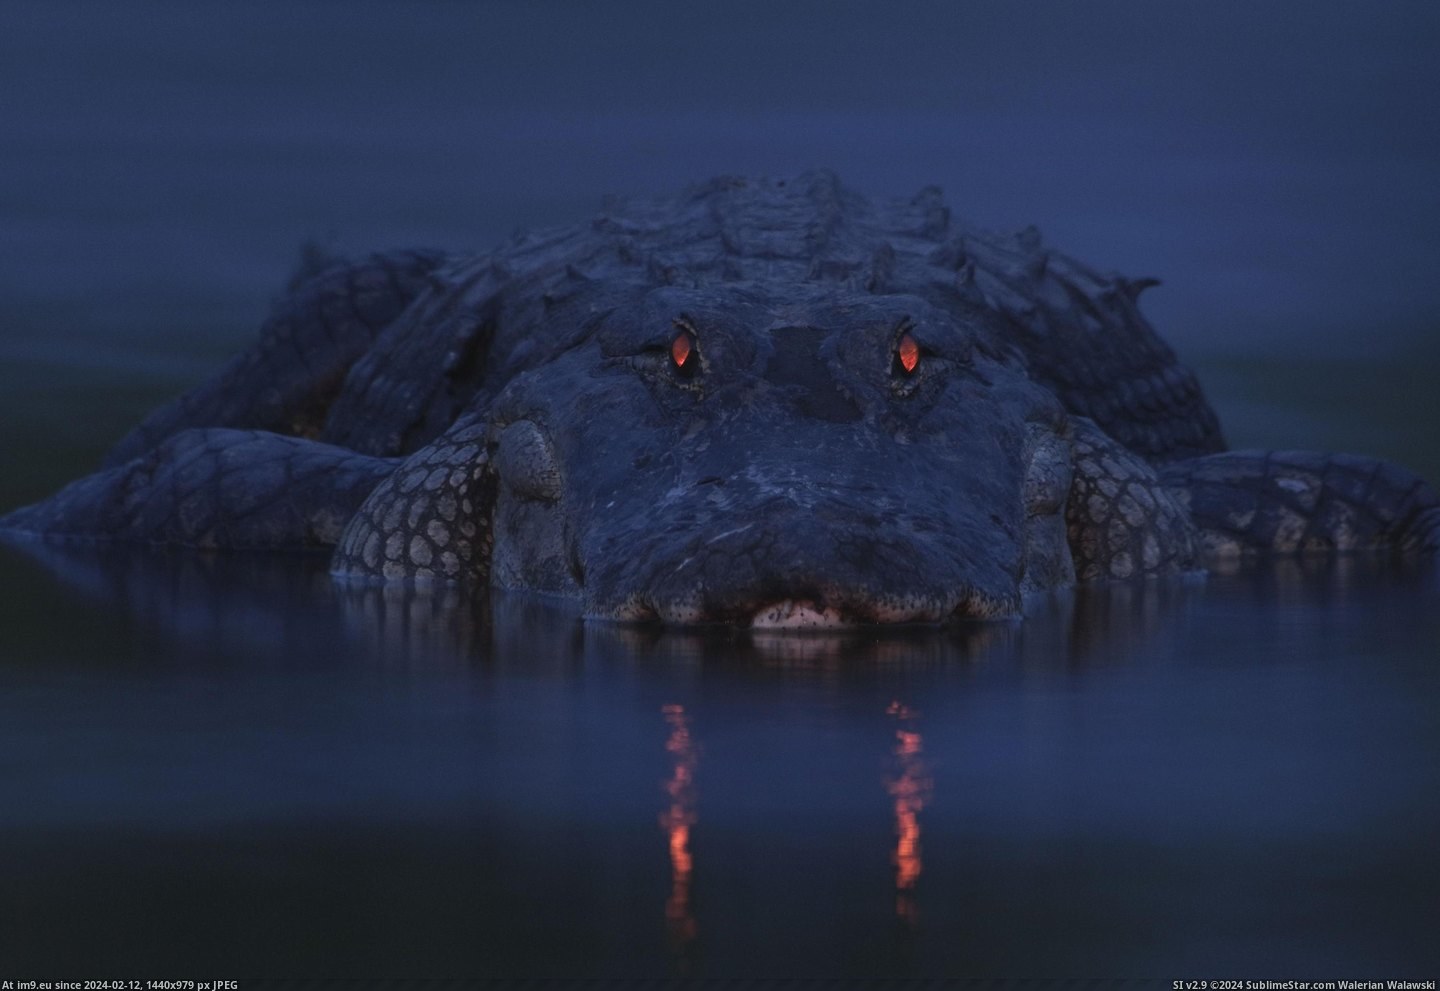 #Eyes #Alligator #Glowing #Dusk [Pics] Glowing eyes of an alligator at dusk Pic. (Image of album My r/PICS favs))